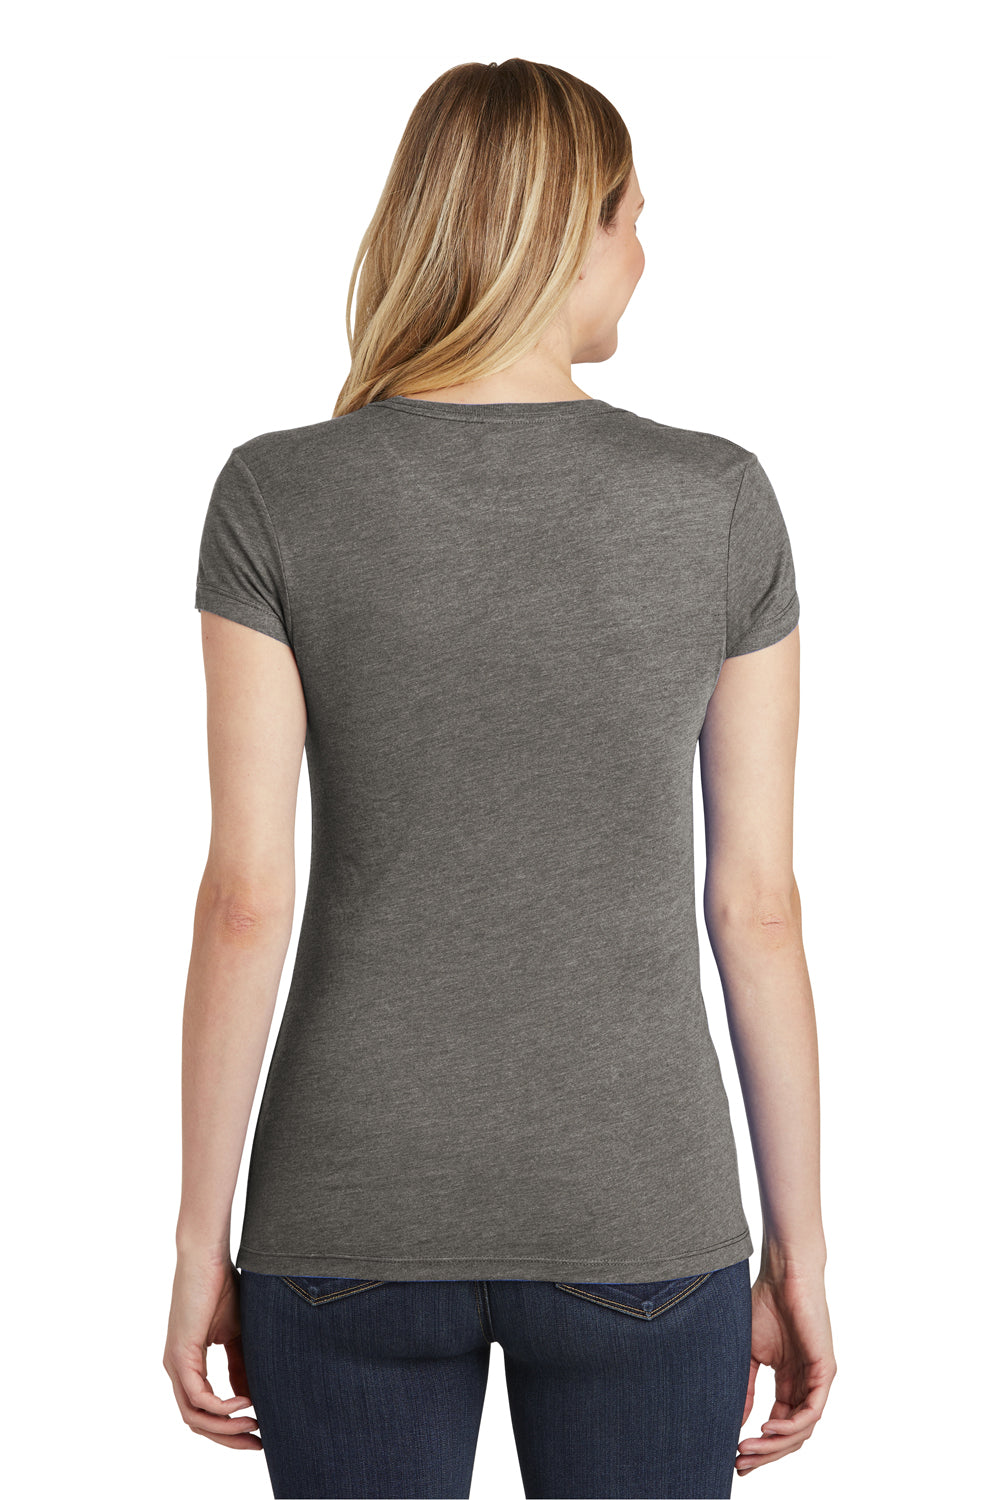 District DT155 Womens Fitted Perfect Tri Short Sleeve Crewneck T-Shirt Grey Back